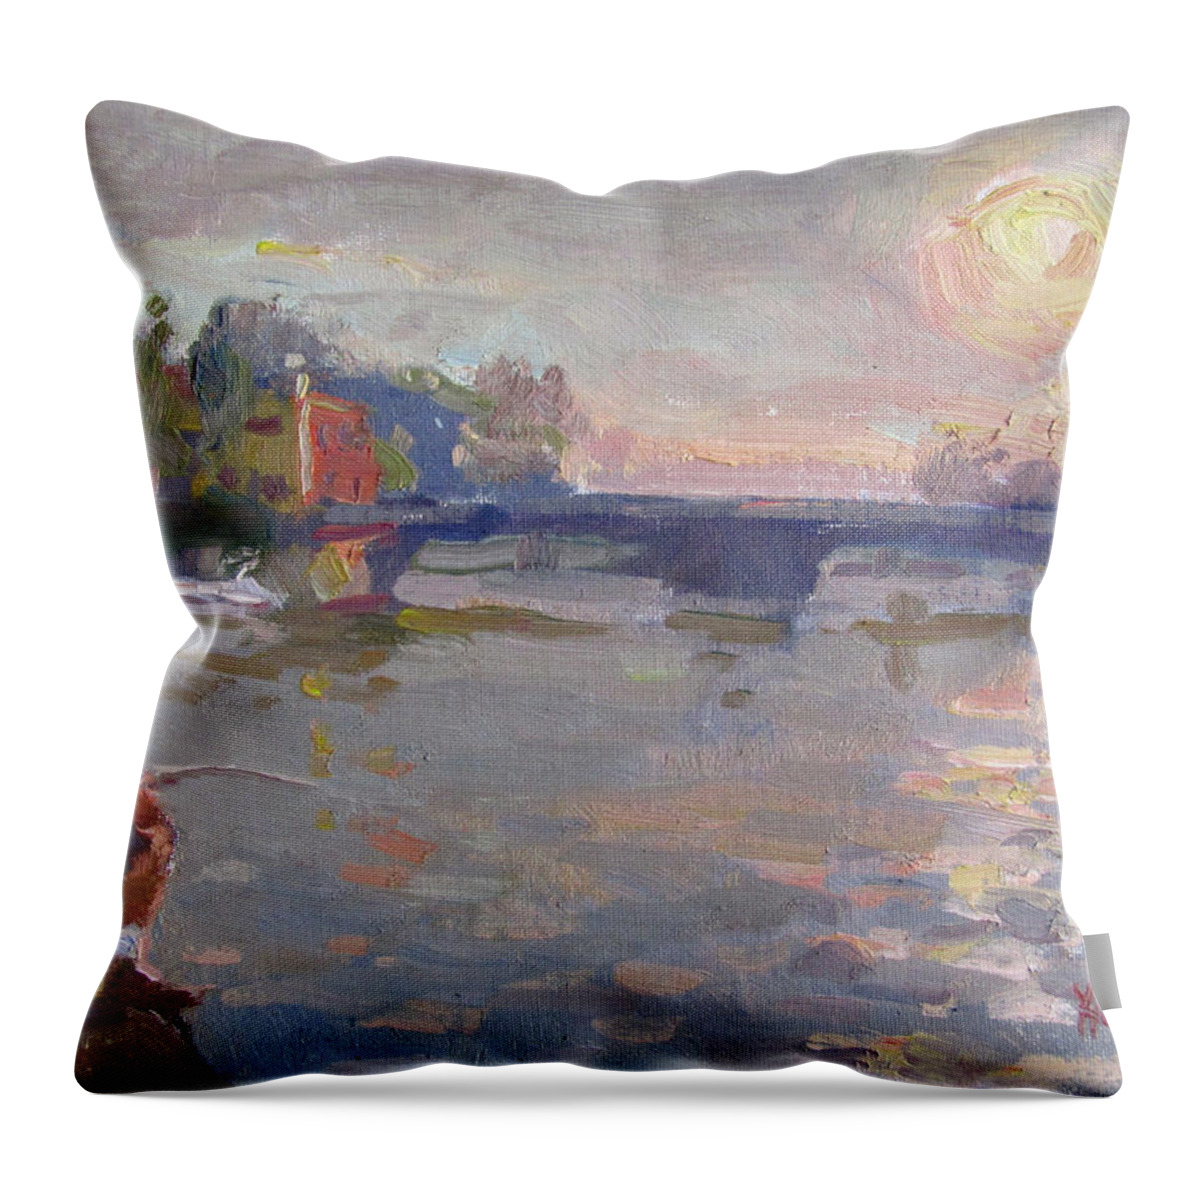 Fishing Throw Pillow featuring the painting Fishing at Sunset by Ylli Haruni